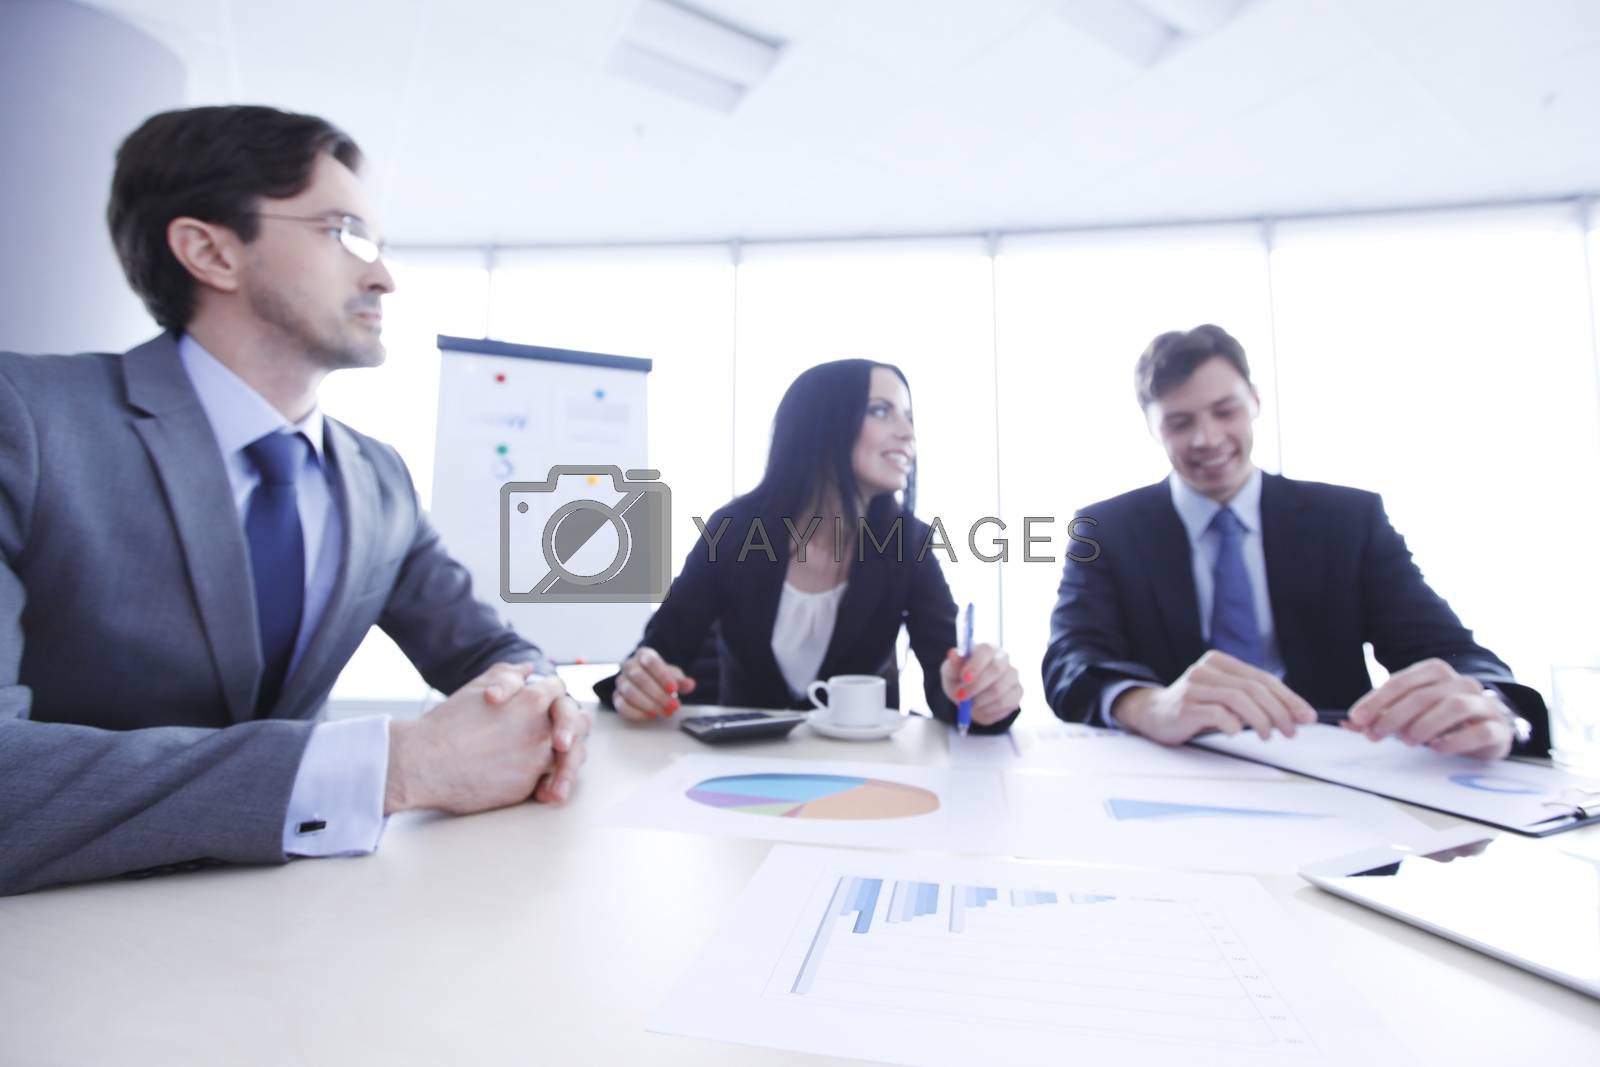 Royalty free image of Business people on meeting by ALotOfPeople